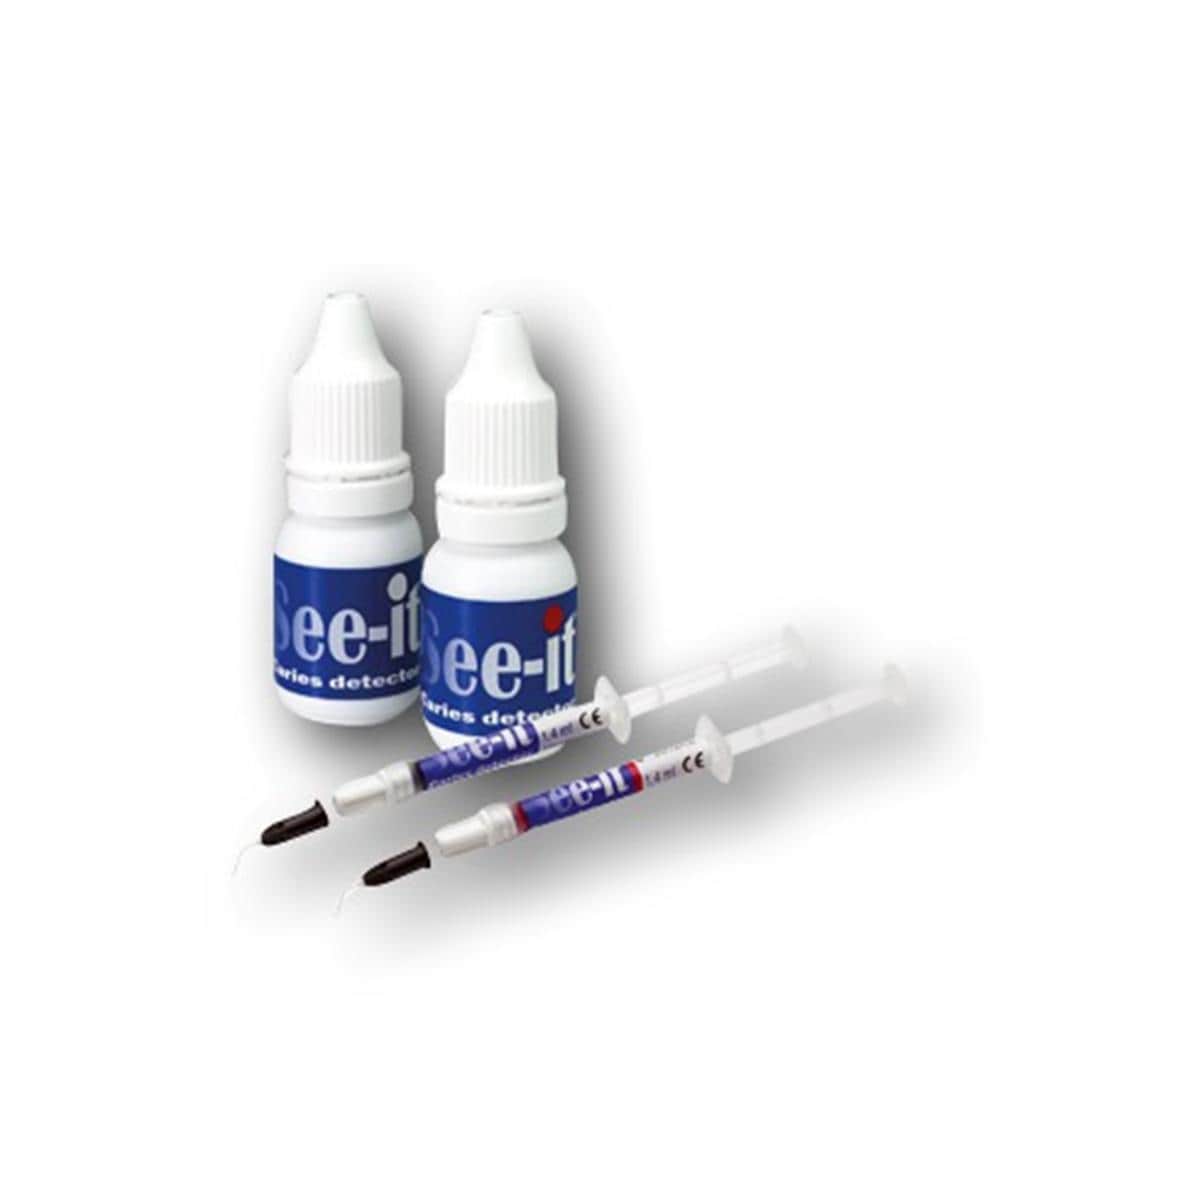 SEE-IT Caries Detector - Rot, Flasche 10 ml